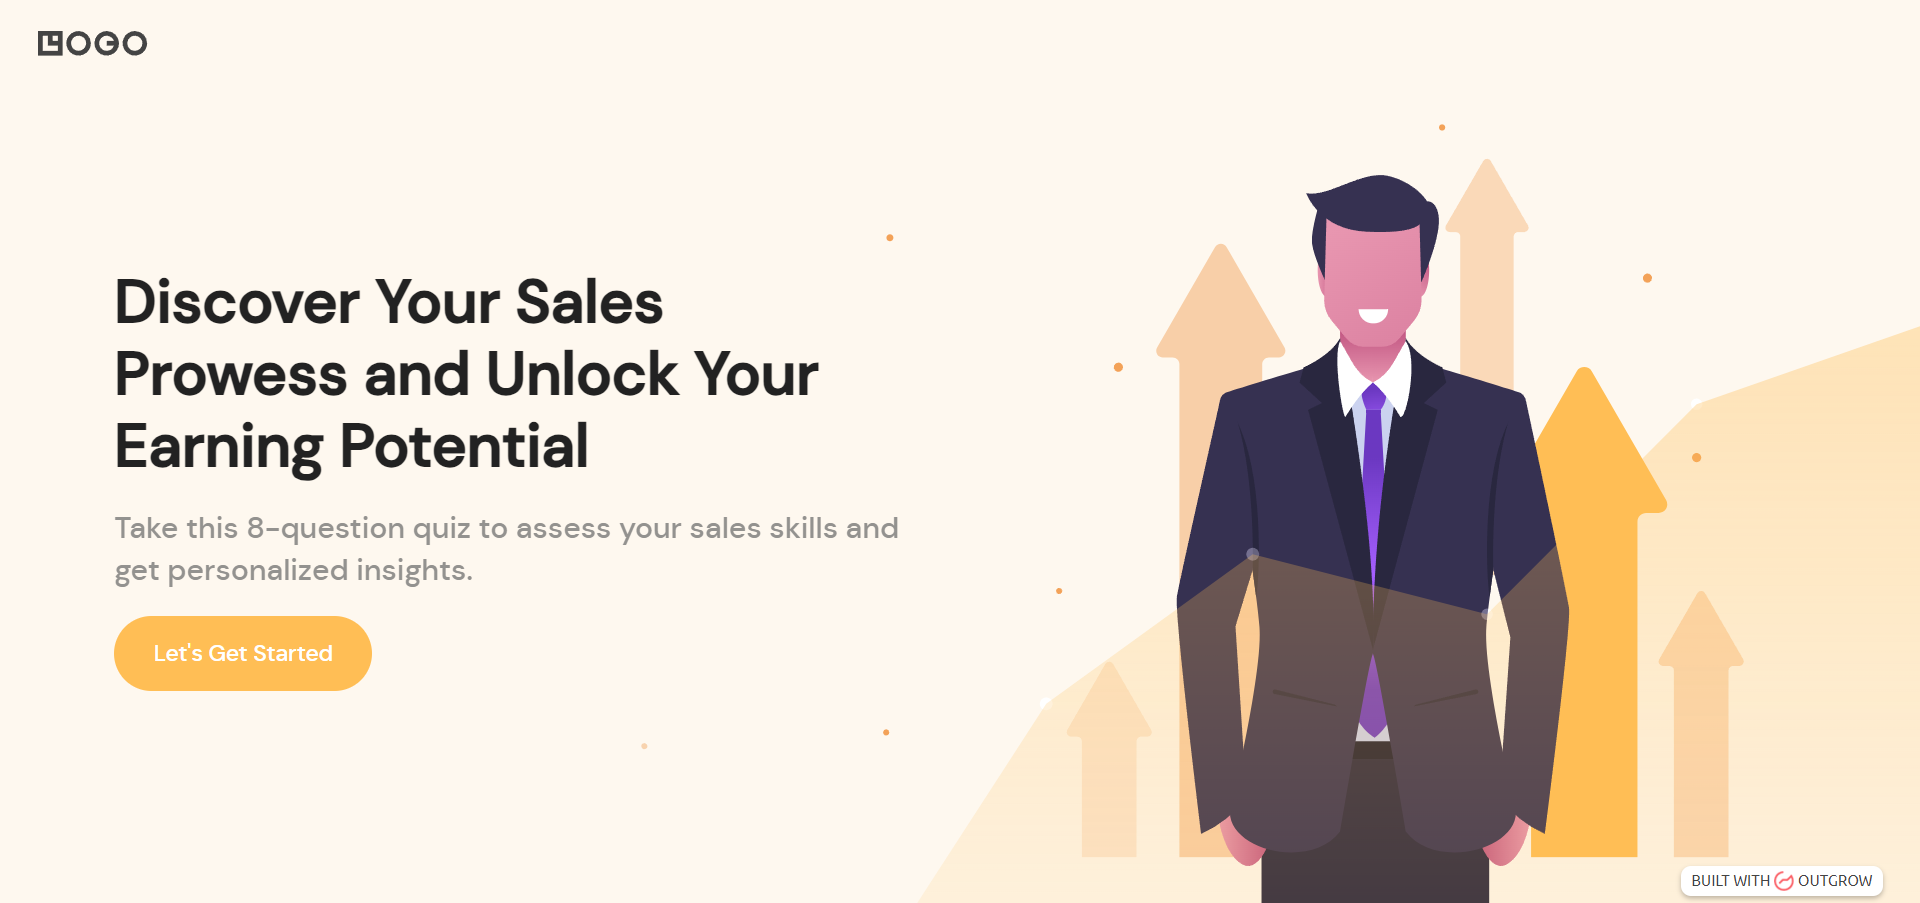 Discover Your Sales Prowess and Unlock Your Earning Potential